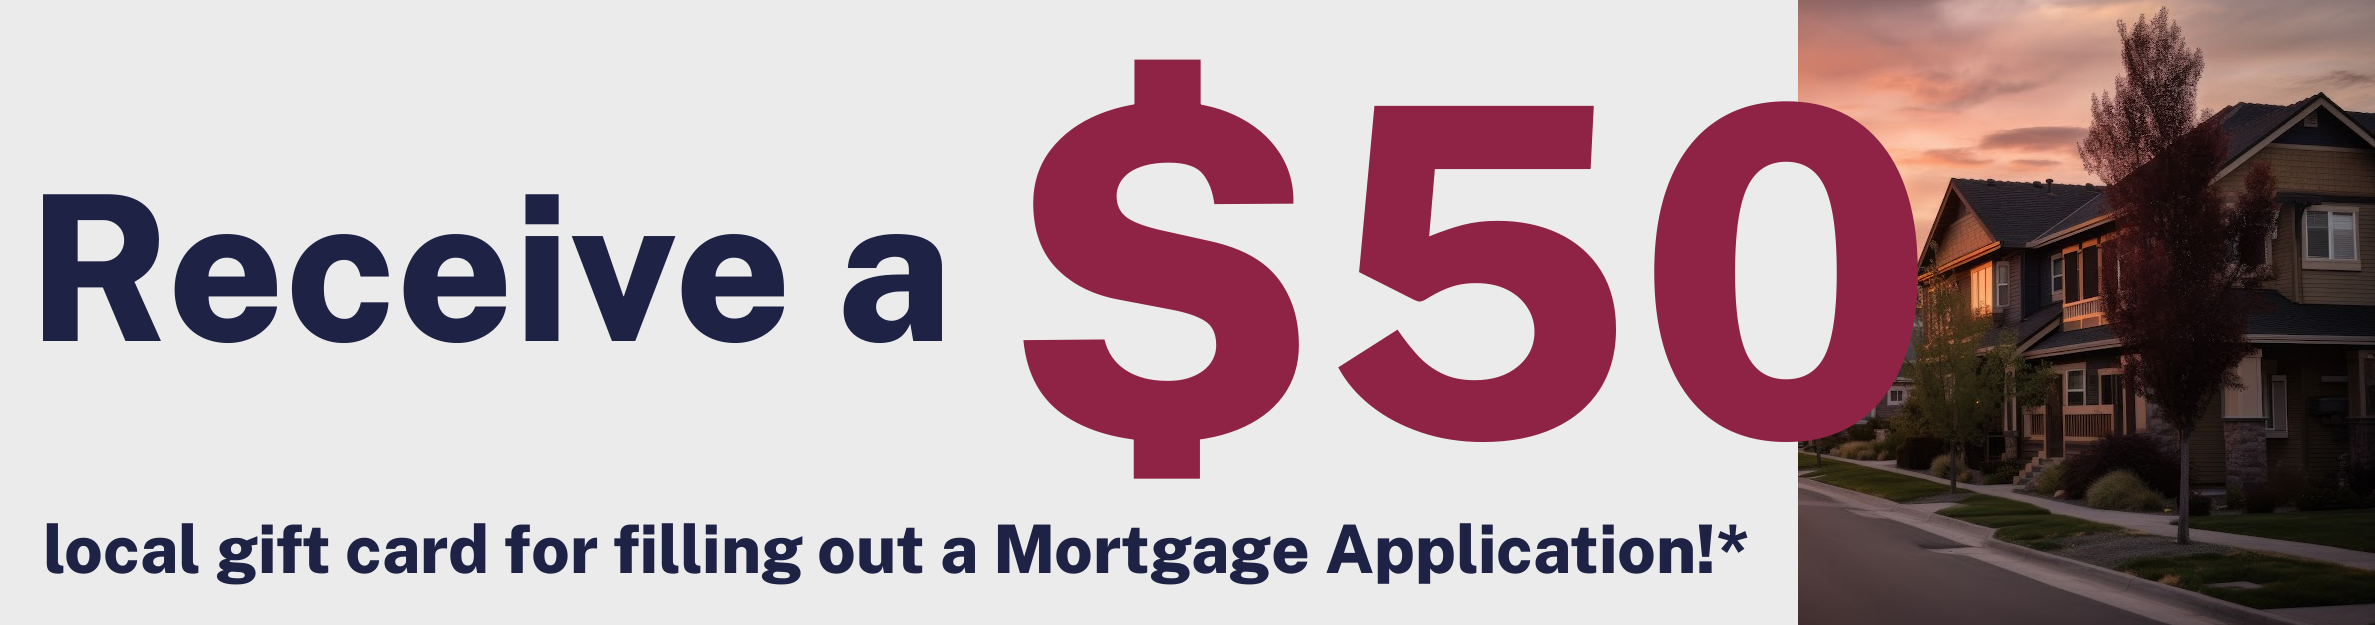 Receive a $50 local gift card for filling out a Mortgage Application!*